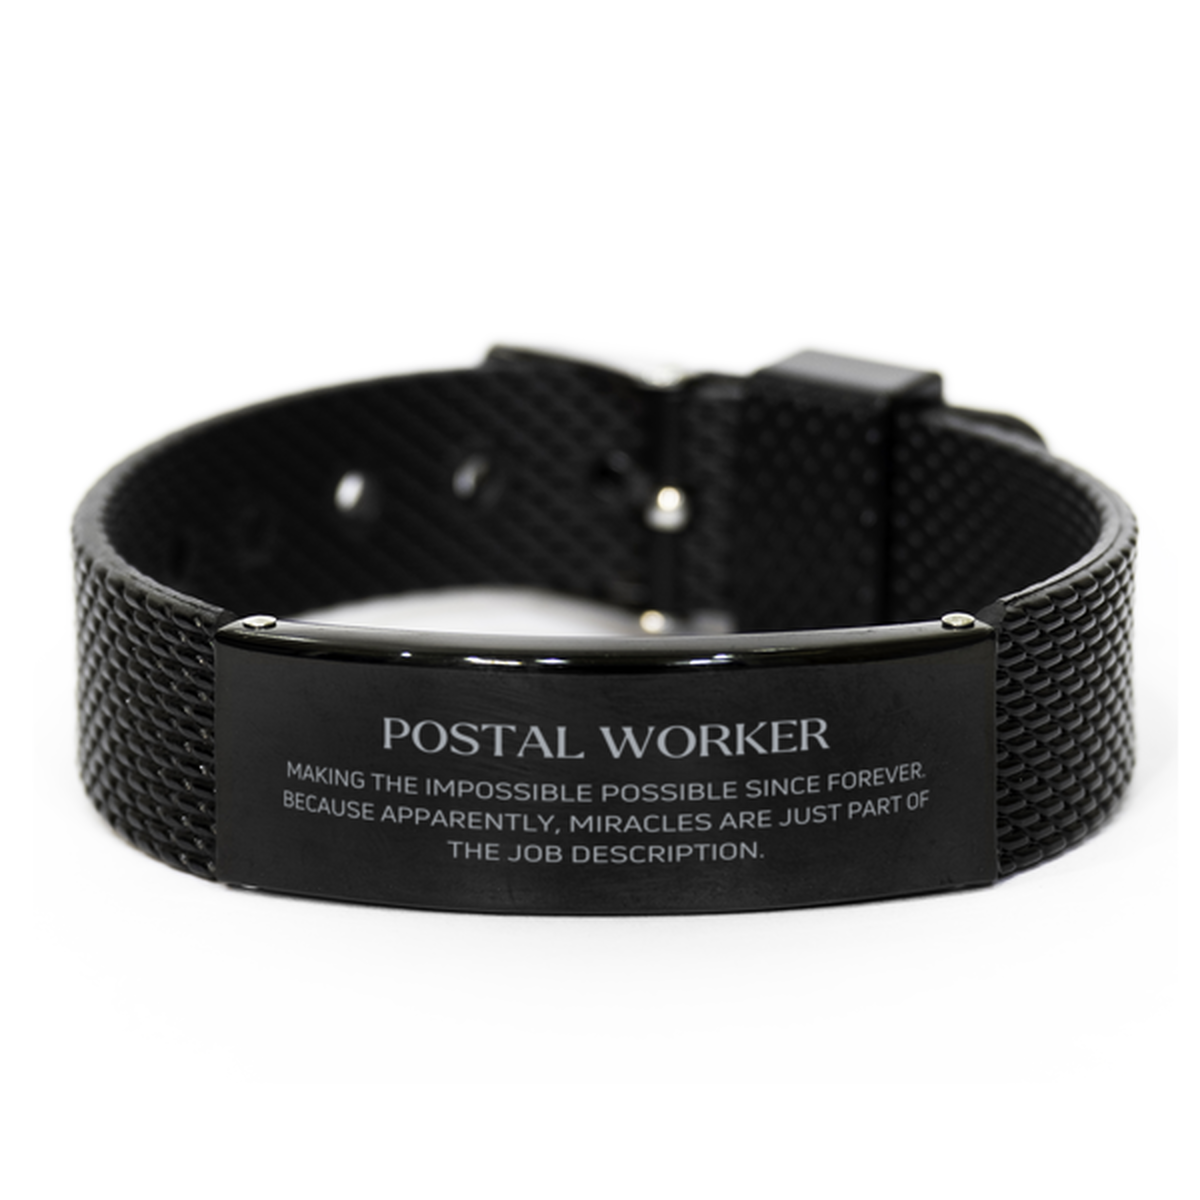 Funny Postal Worker Gifts, Miracles are just part of the job description, Inspirational Birthday Black Shark Mesh Bracelet For Postal Worker, Men, Women, Coworkers, Friends, Boss